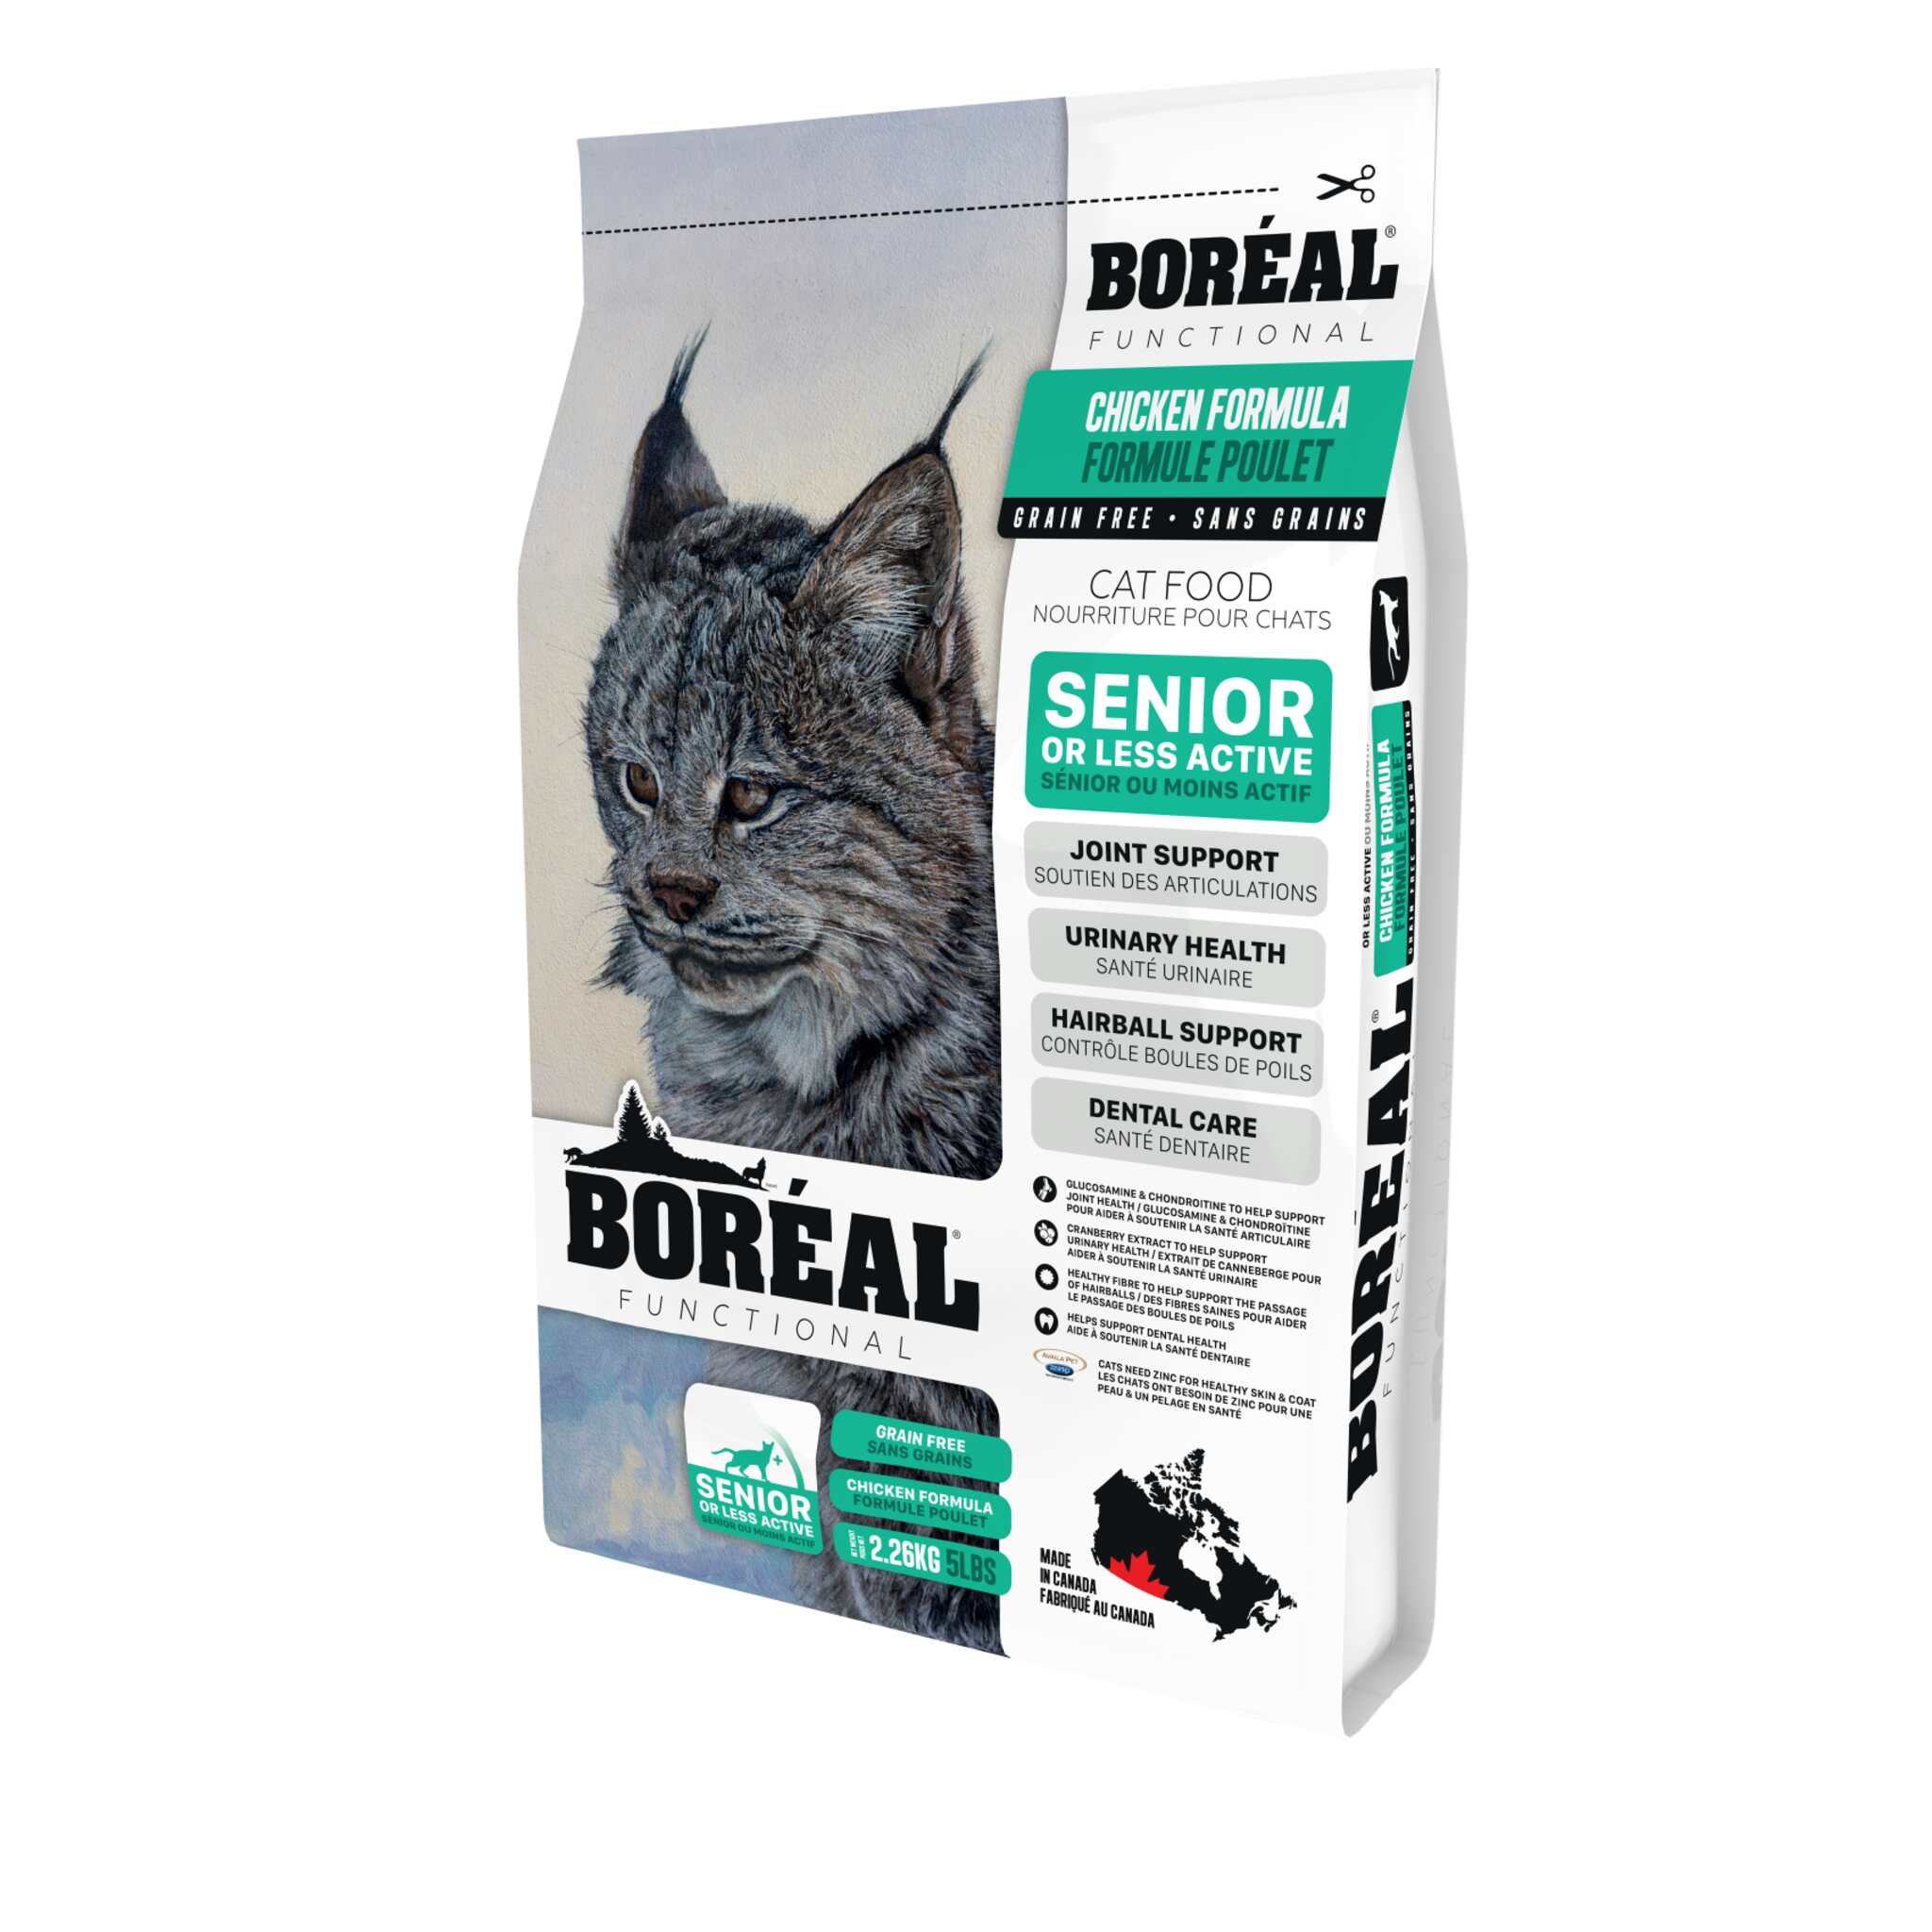 Boreal dry Cat Food, Senior or less active recipe, joint support, urinary health, grain-free, 5 lb.